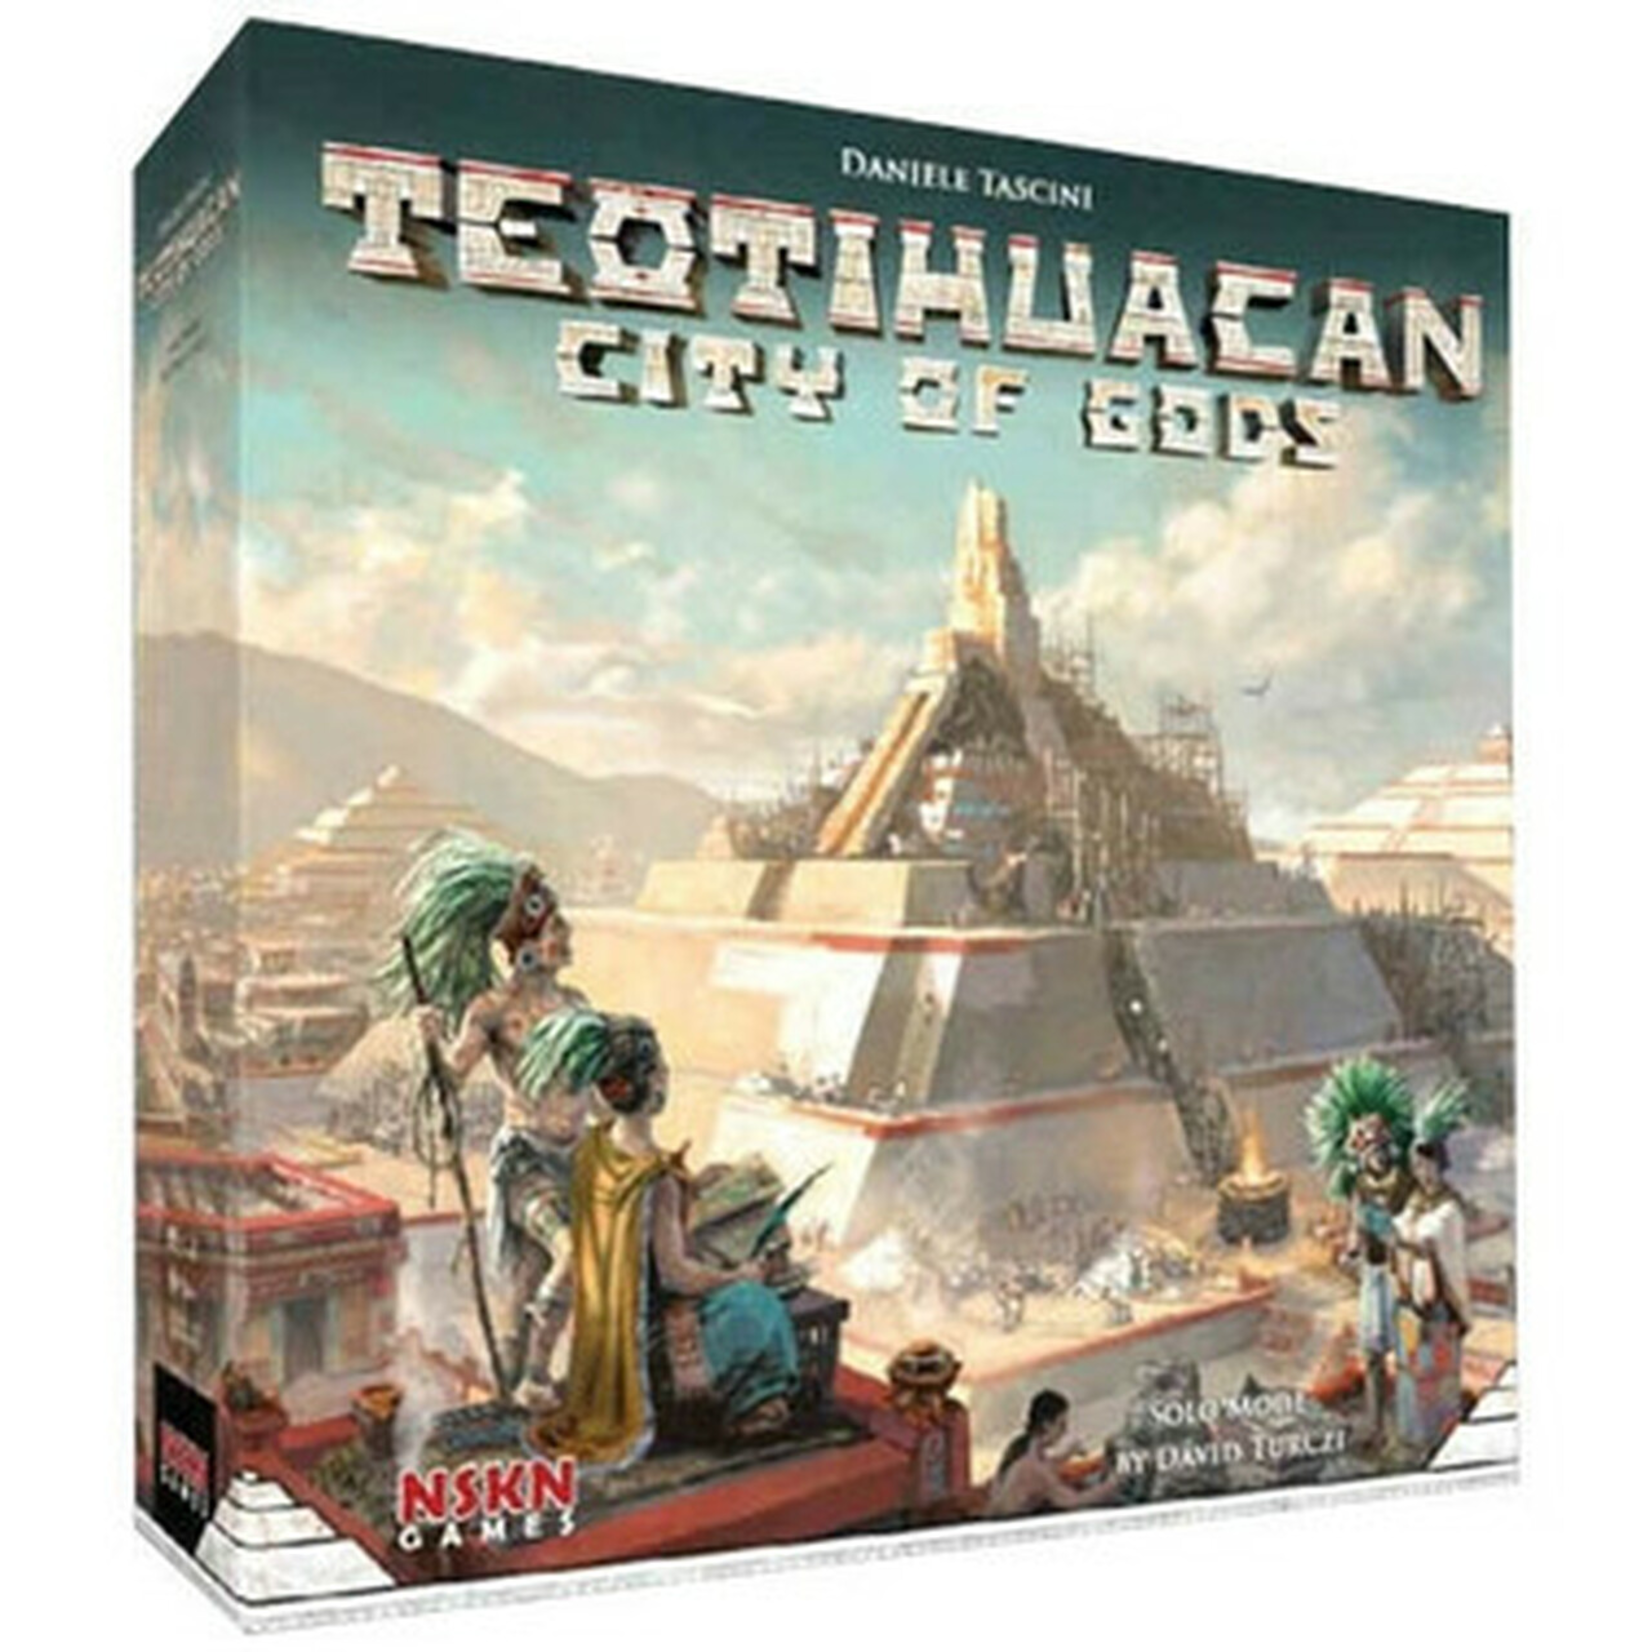 Board and Dice Teotihuacan City of Gods